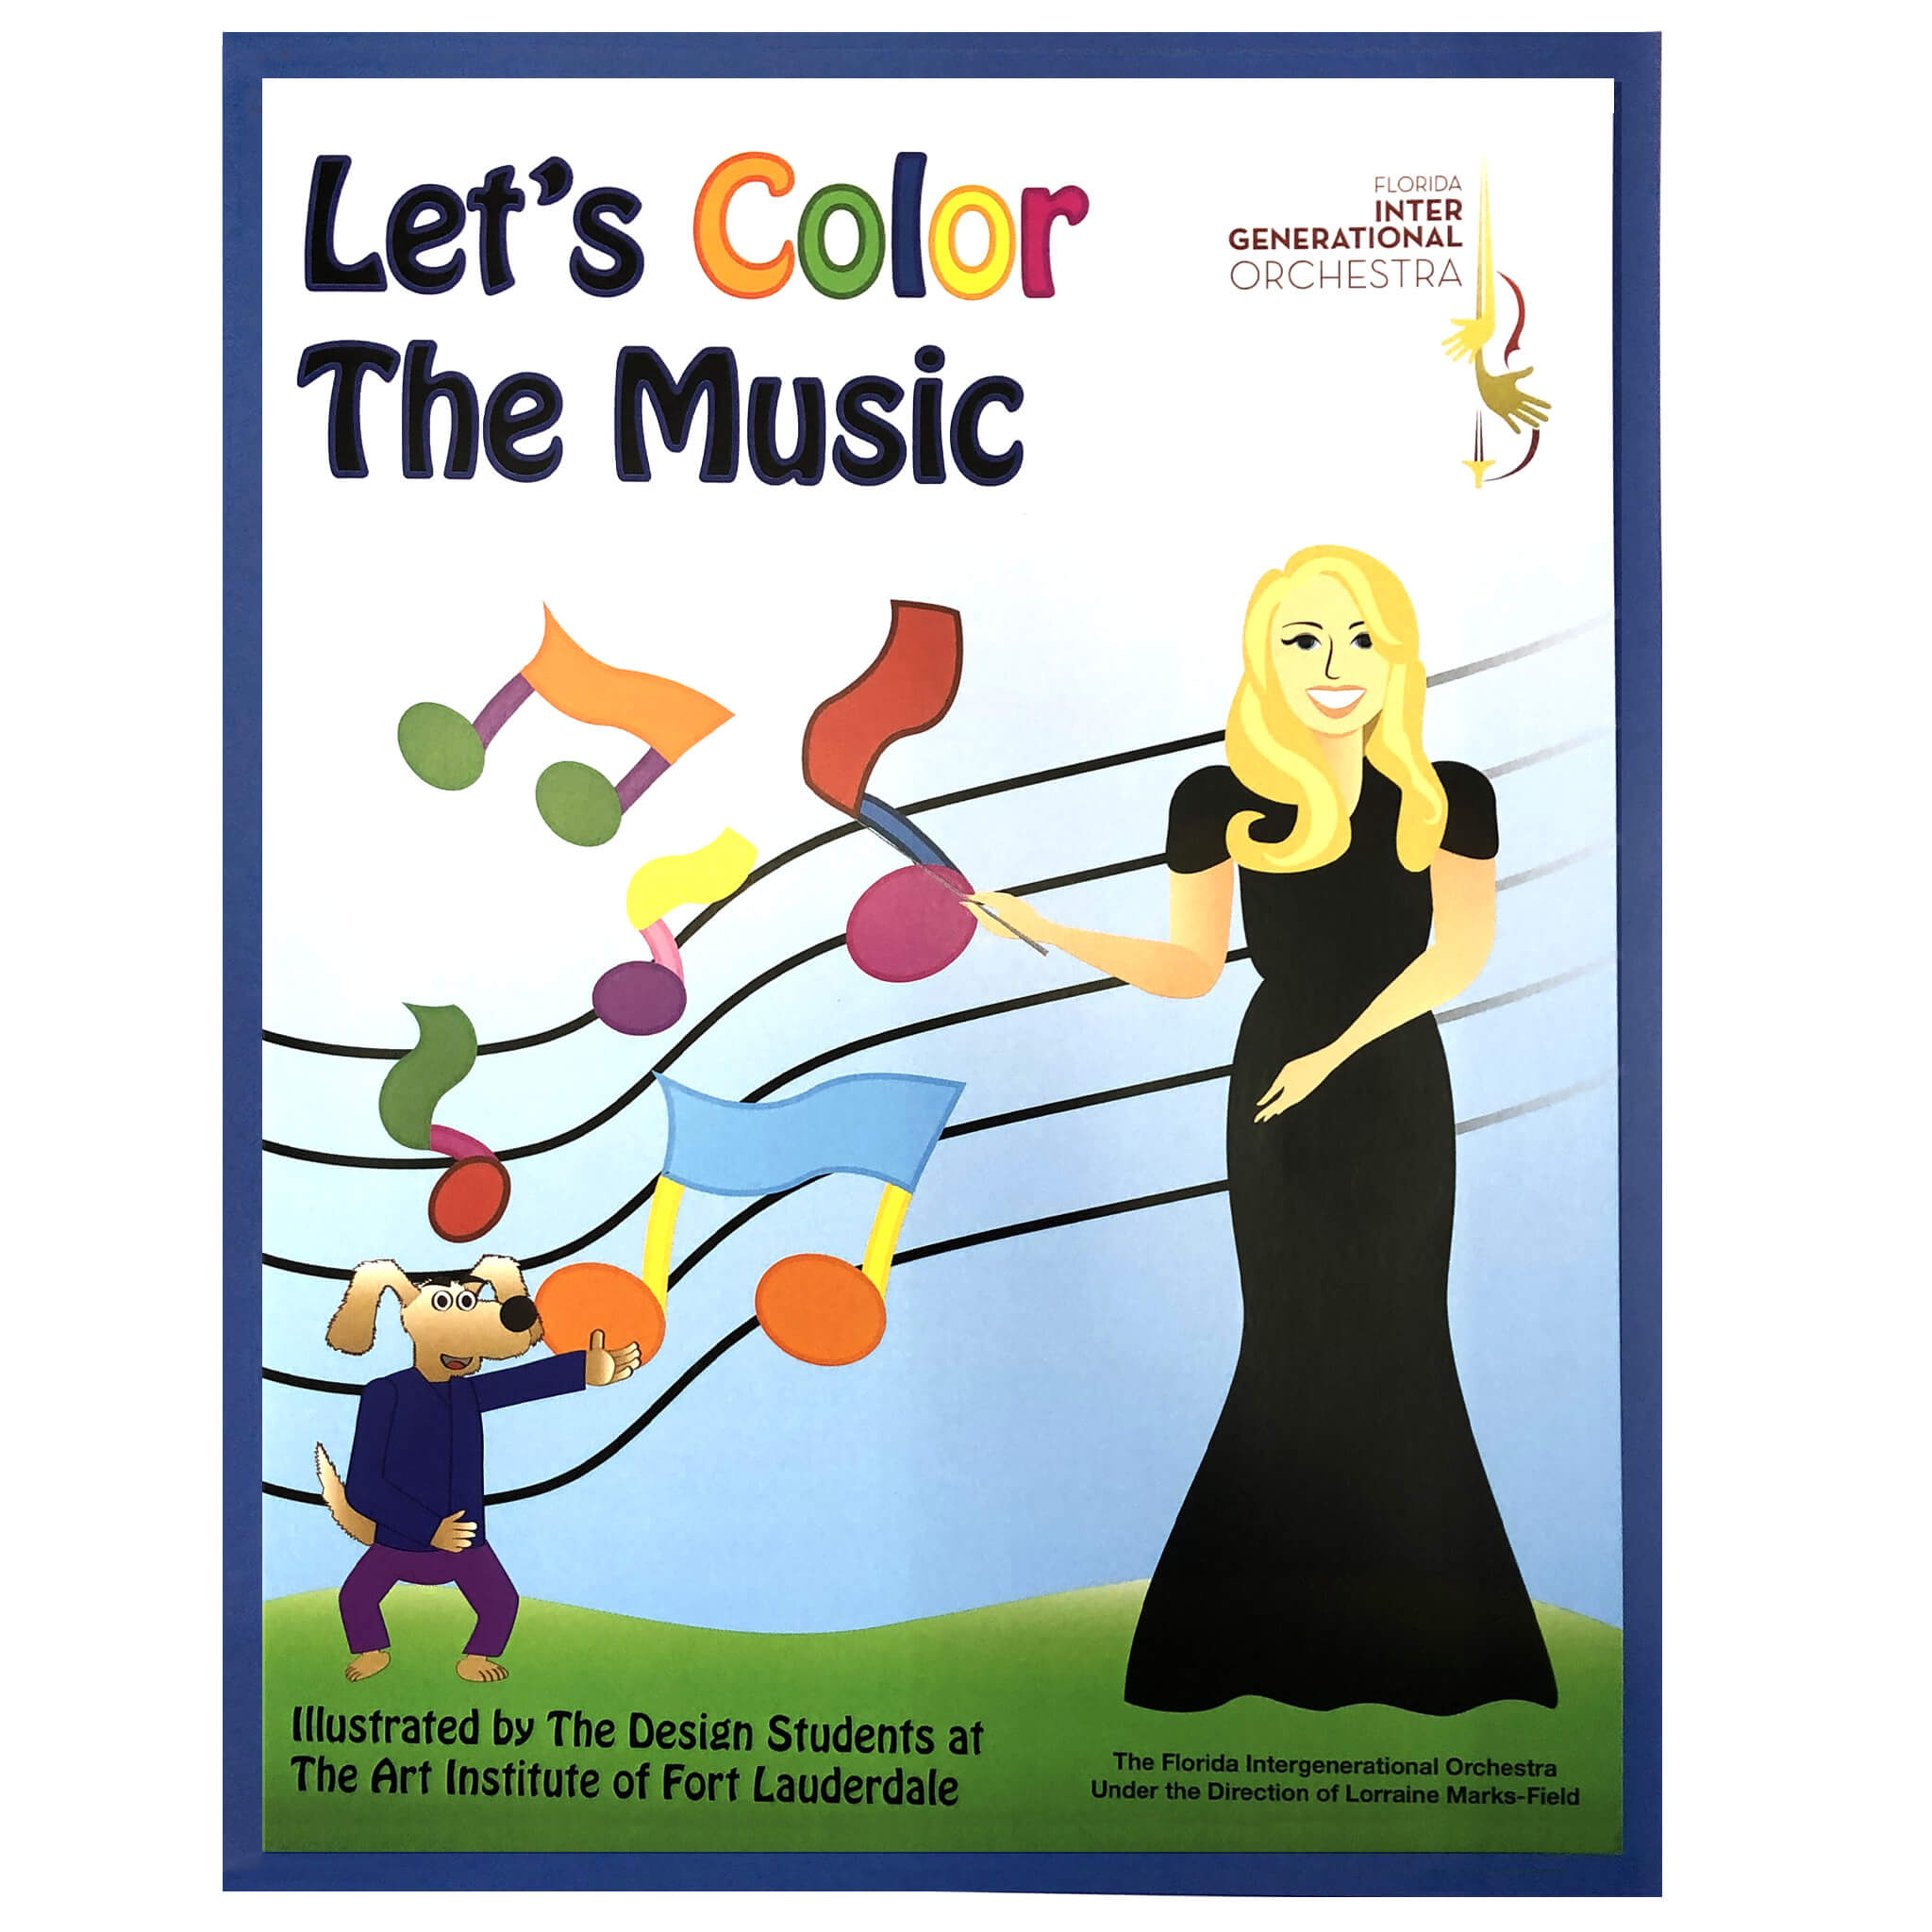 Let's Color The Music